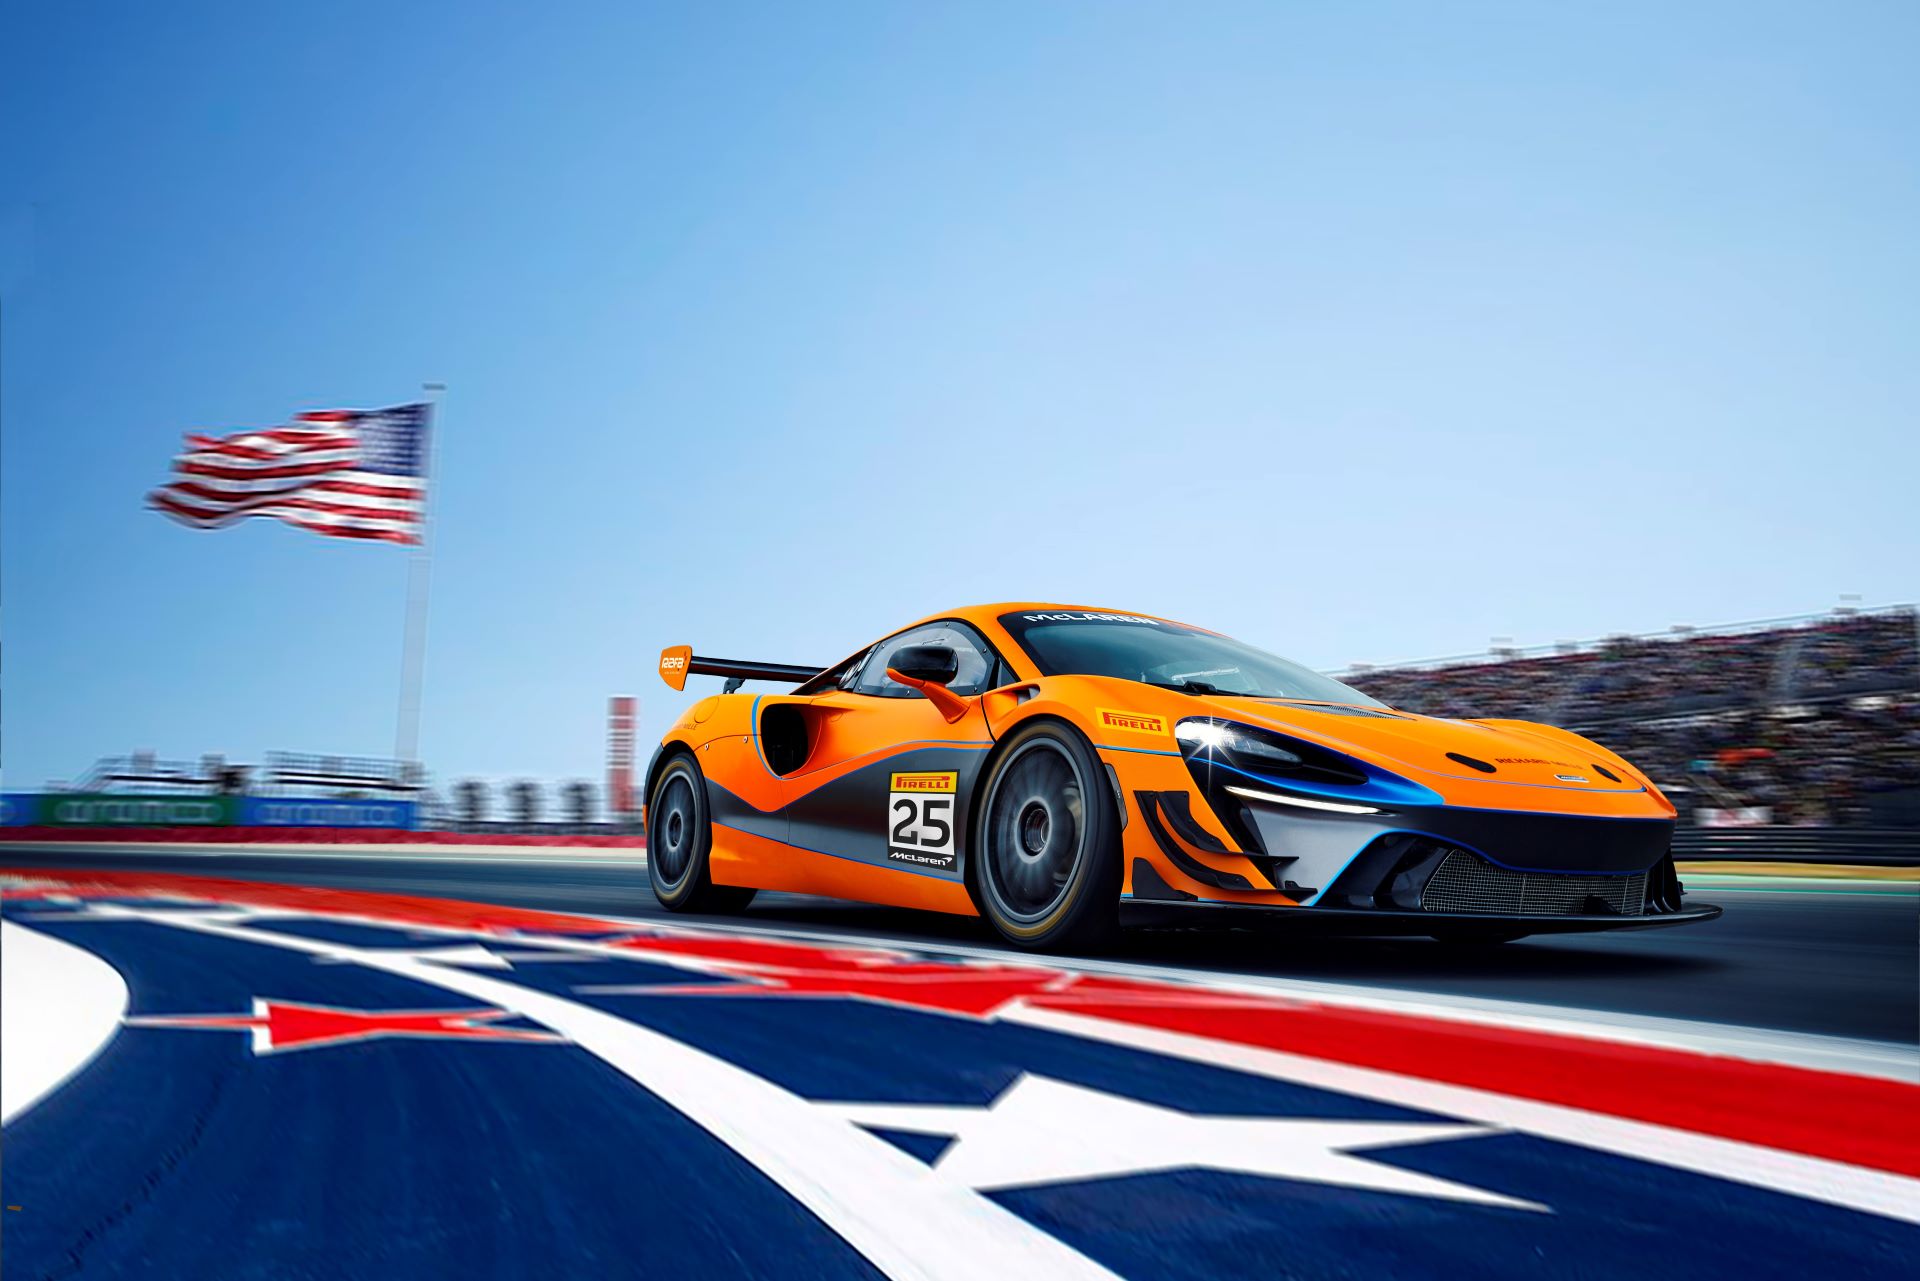 McLaren Trophy expands to America with new championship in 2025